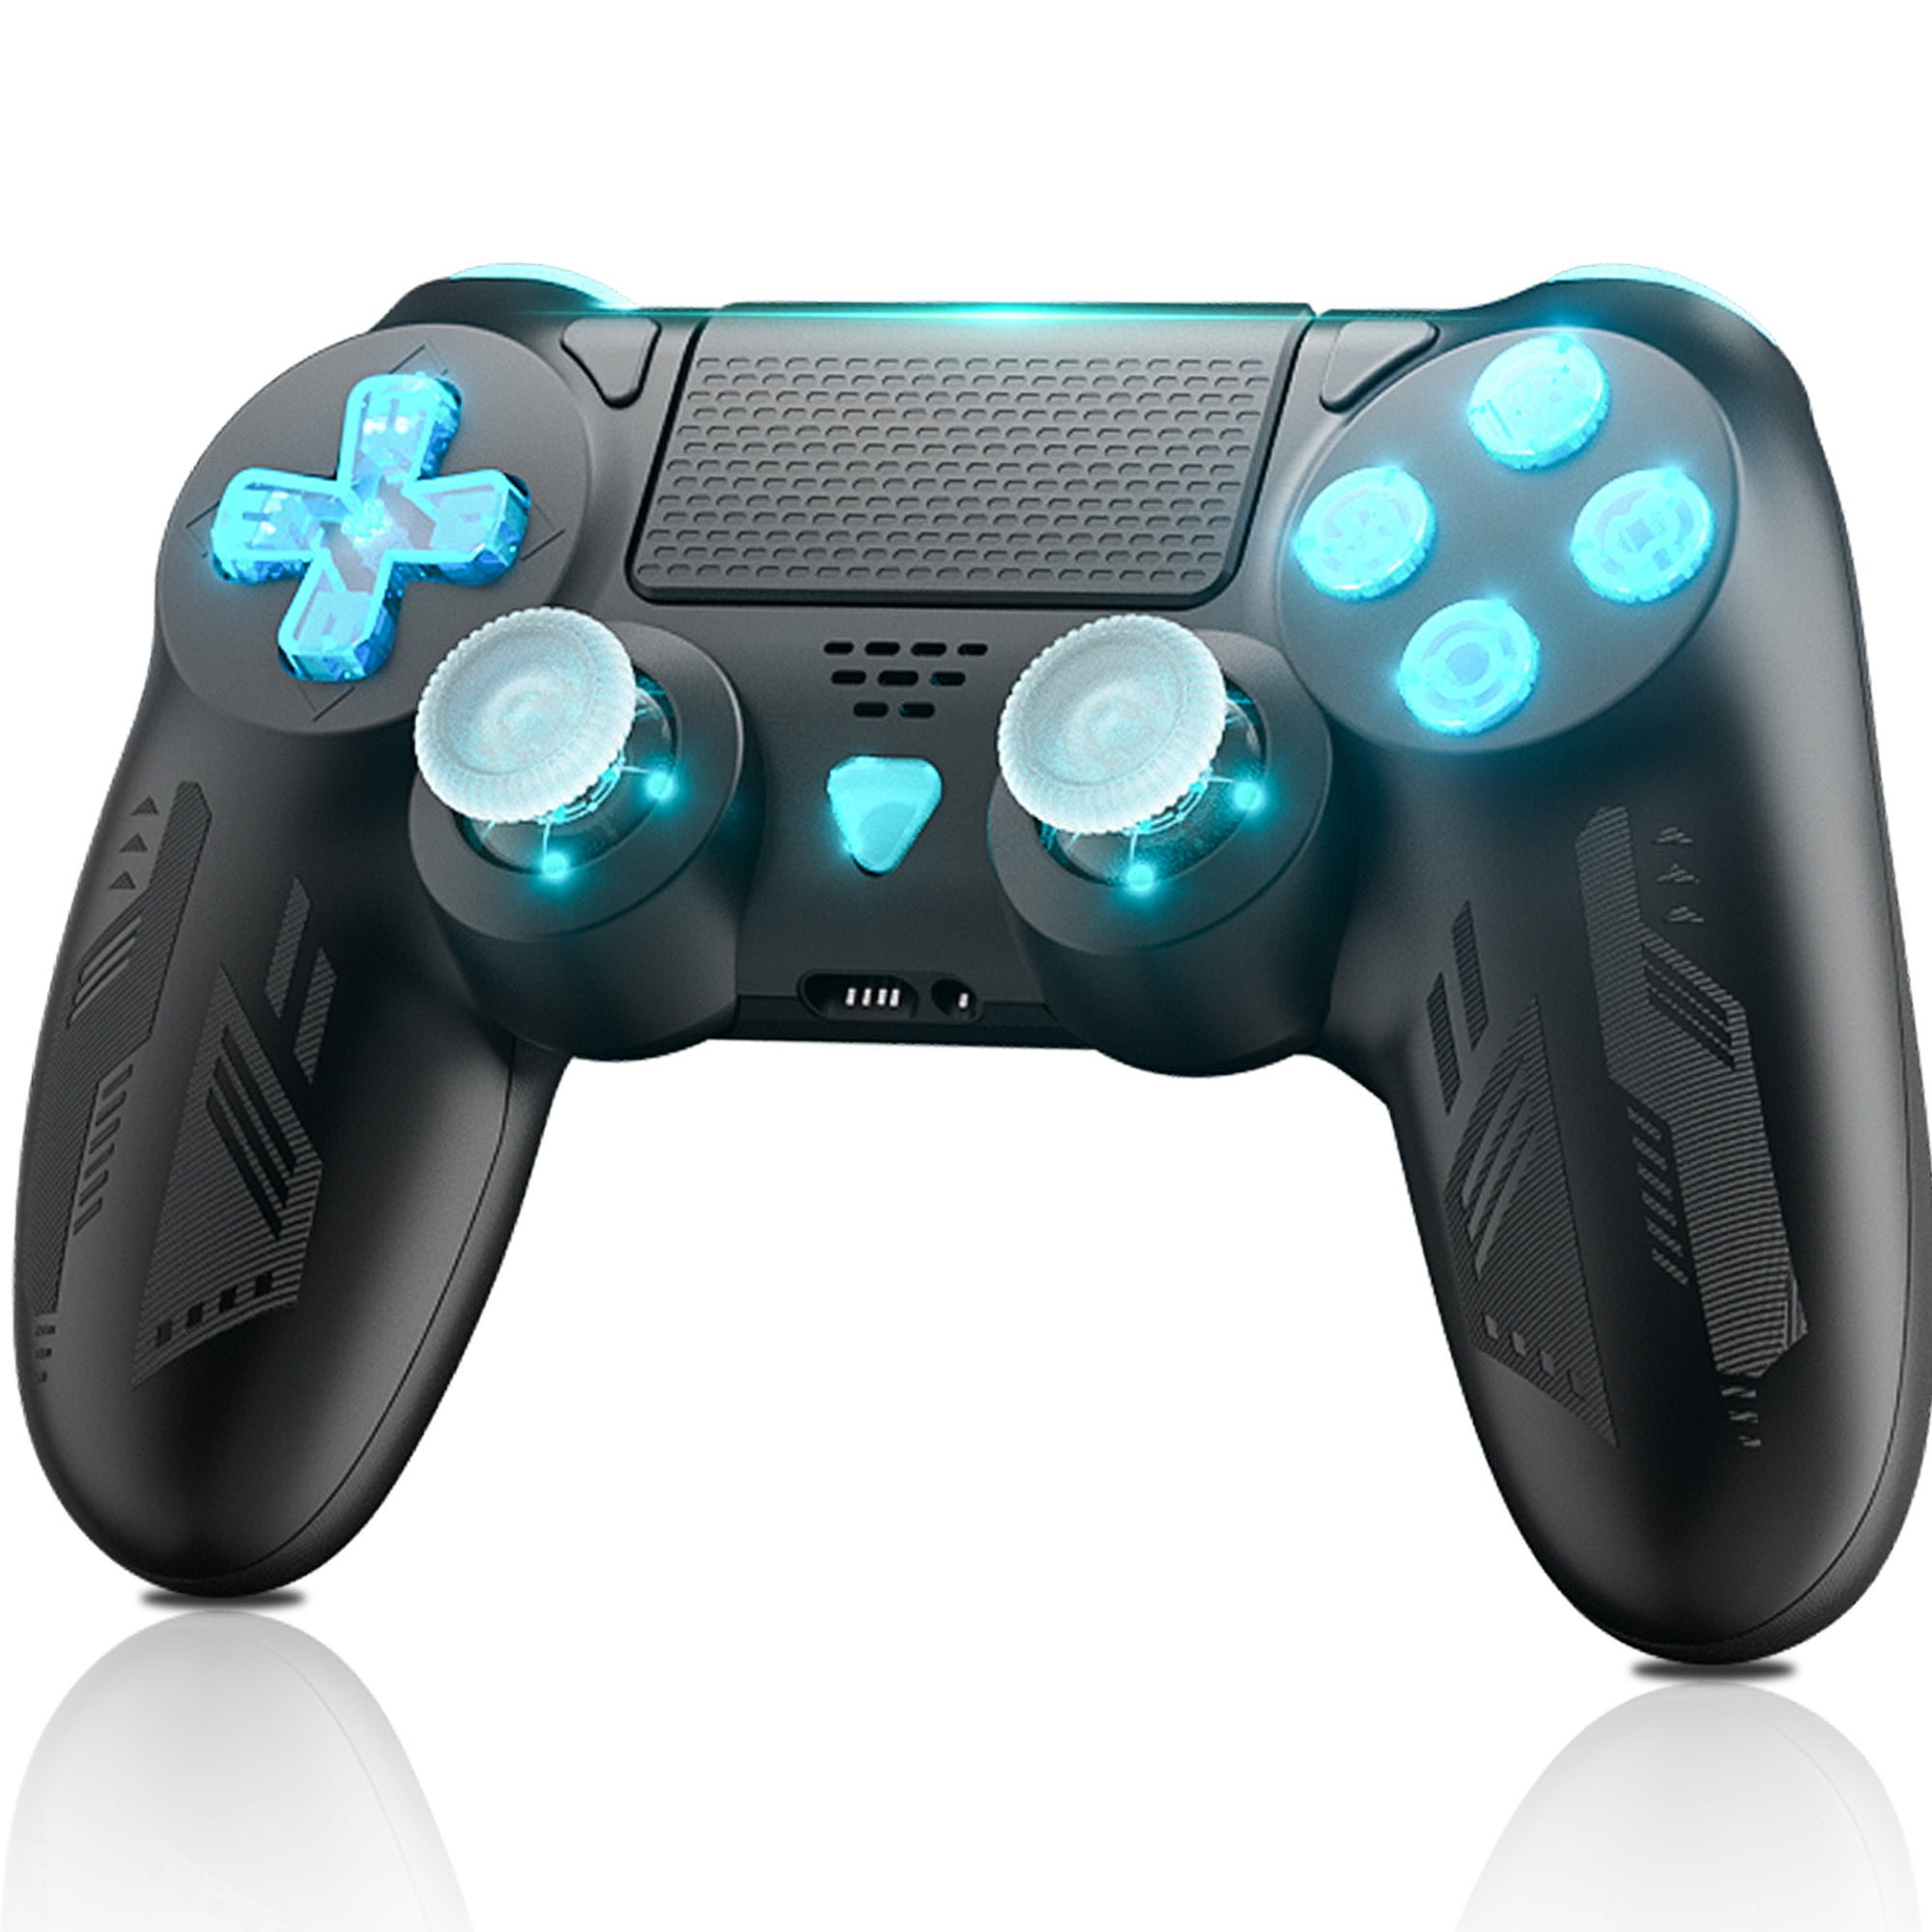 Bonadget Wireless Controller for PS4,with Custom LED Light - Compatible Playstation 4/Slim/Pro, for Remote Joystick Ps4 Support Turbo/Dual Vibration/6-Axis Motion Sensor/ Touch Pad - Walmart.com